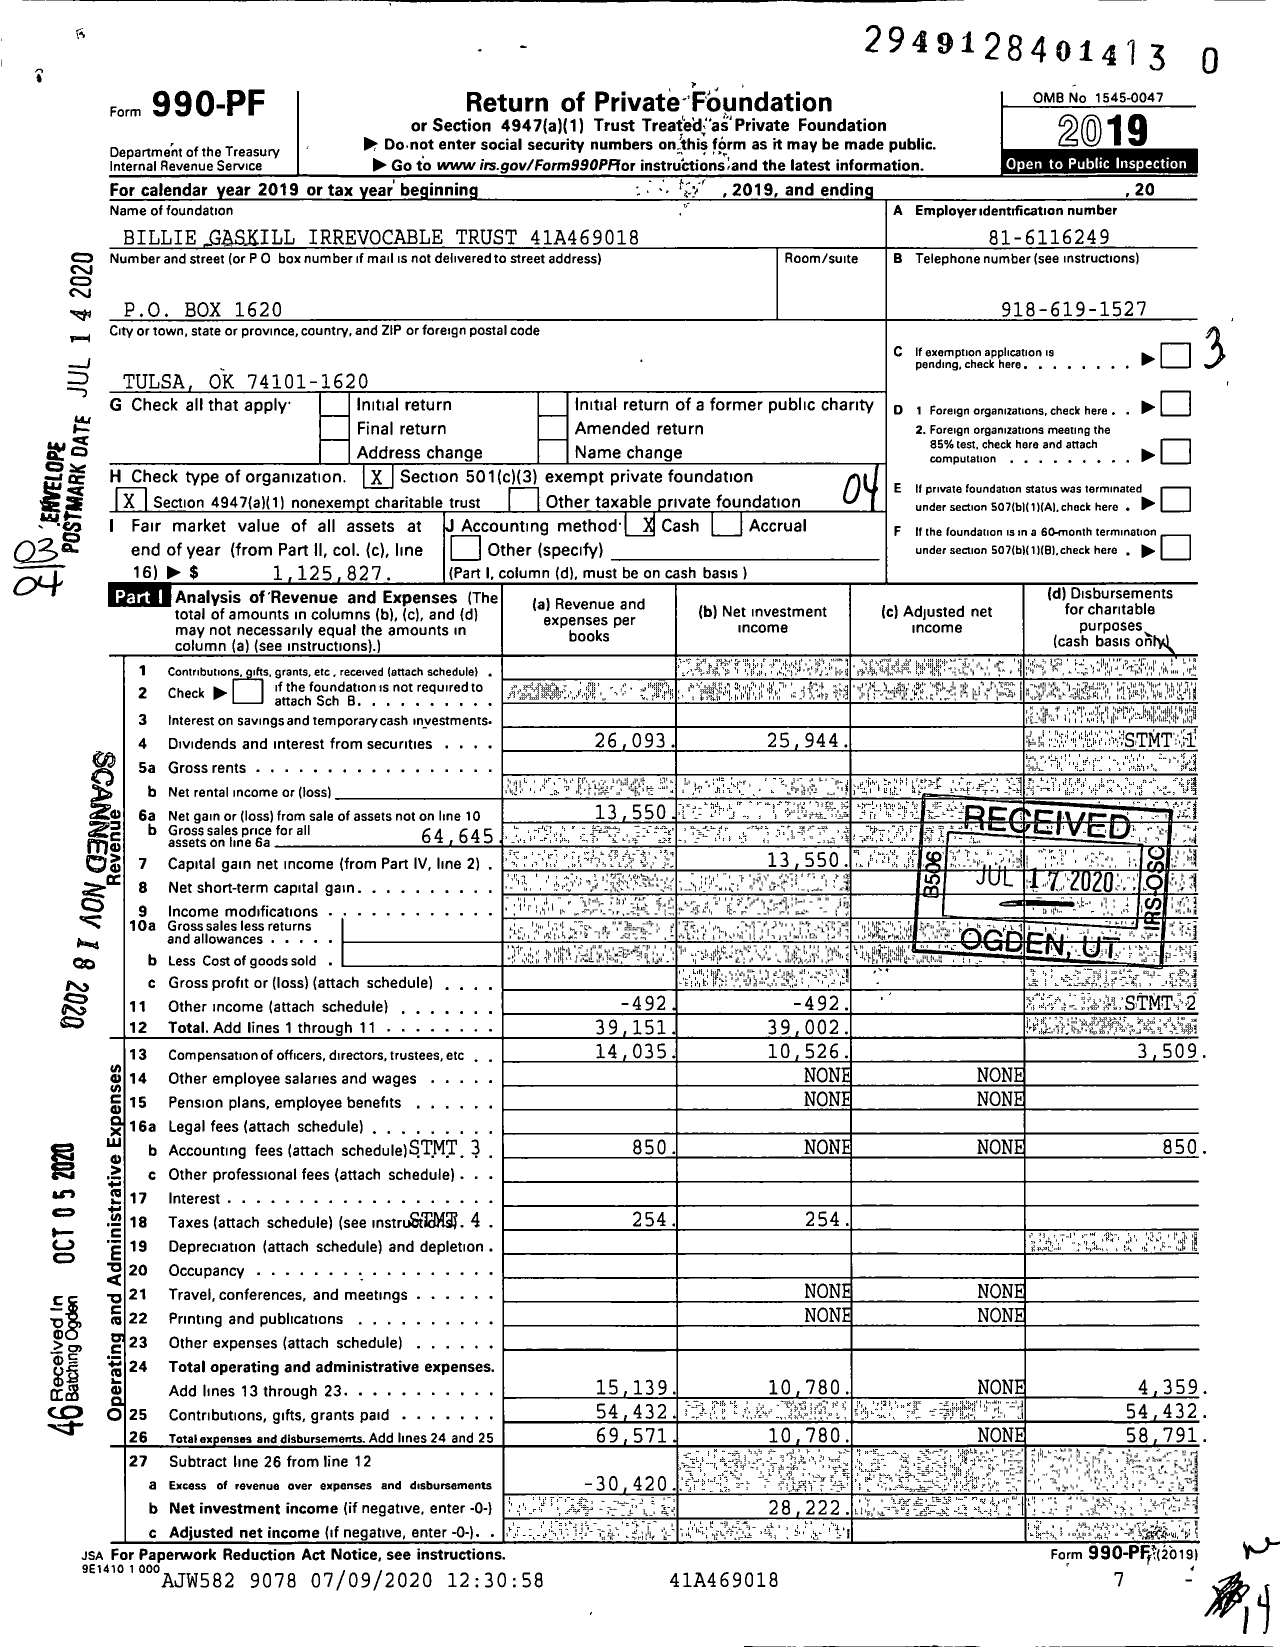 Image of first page of 2019 Form 990PF for Billie Gaskill Irrevocable Trust 41a469018